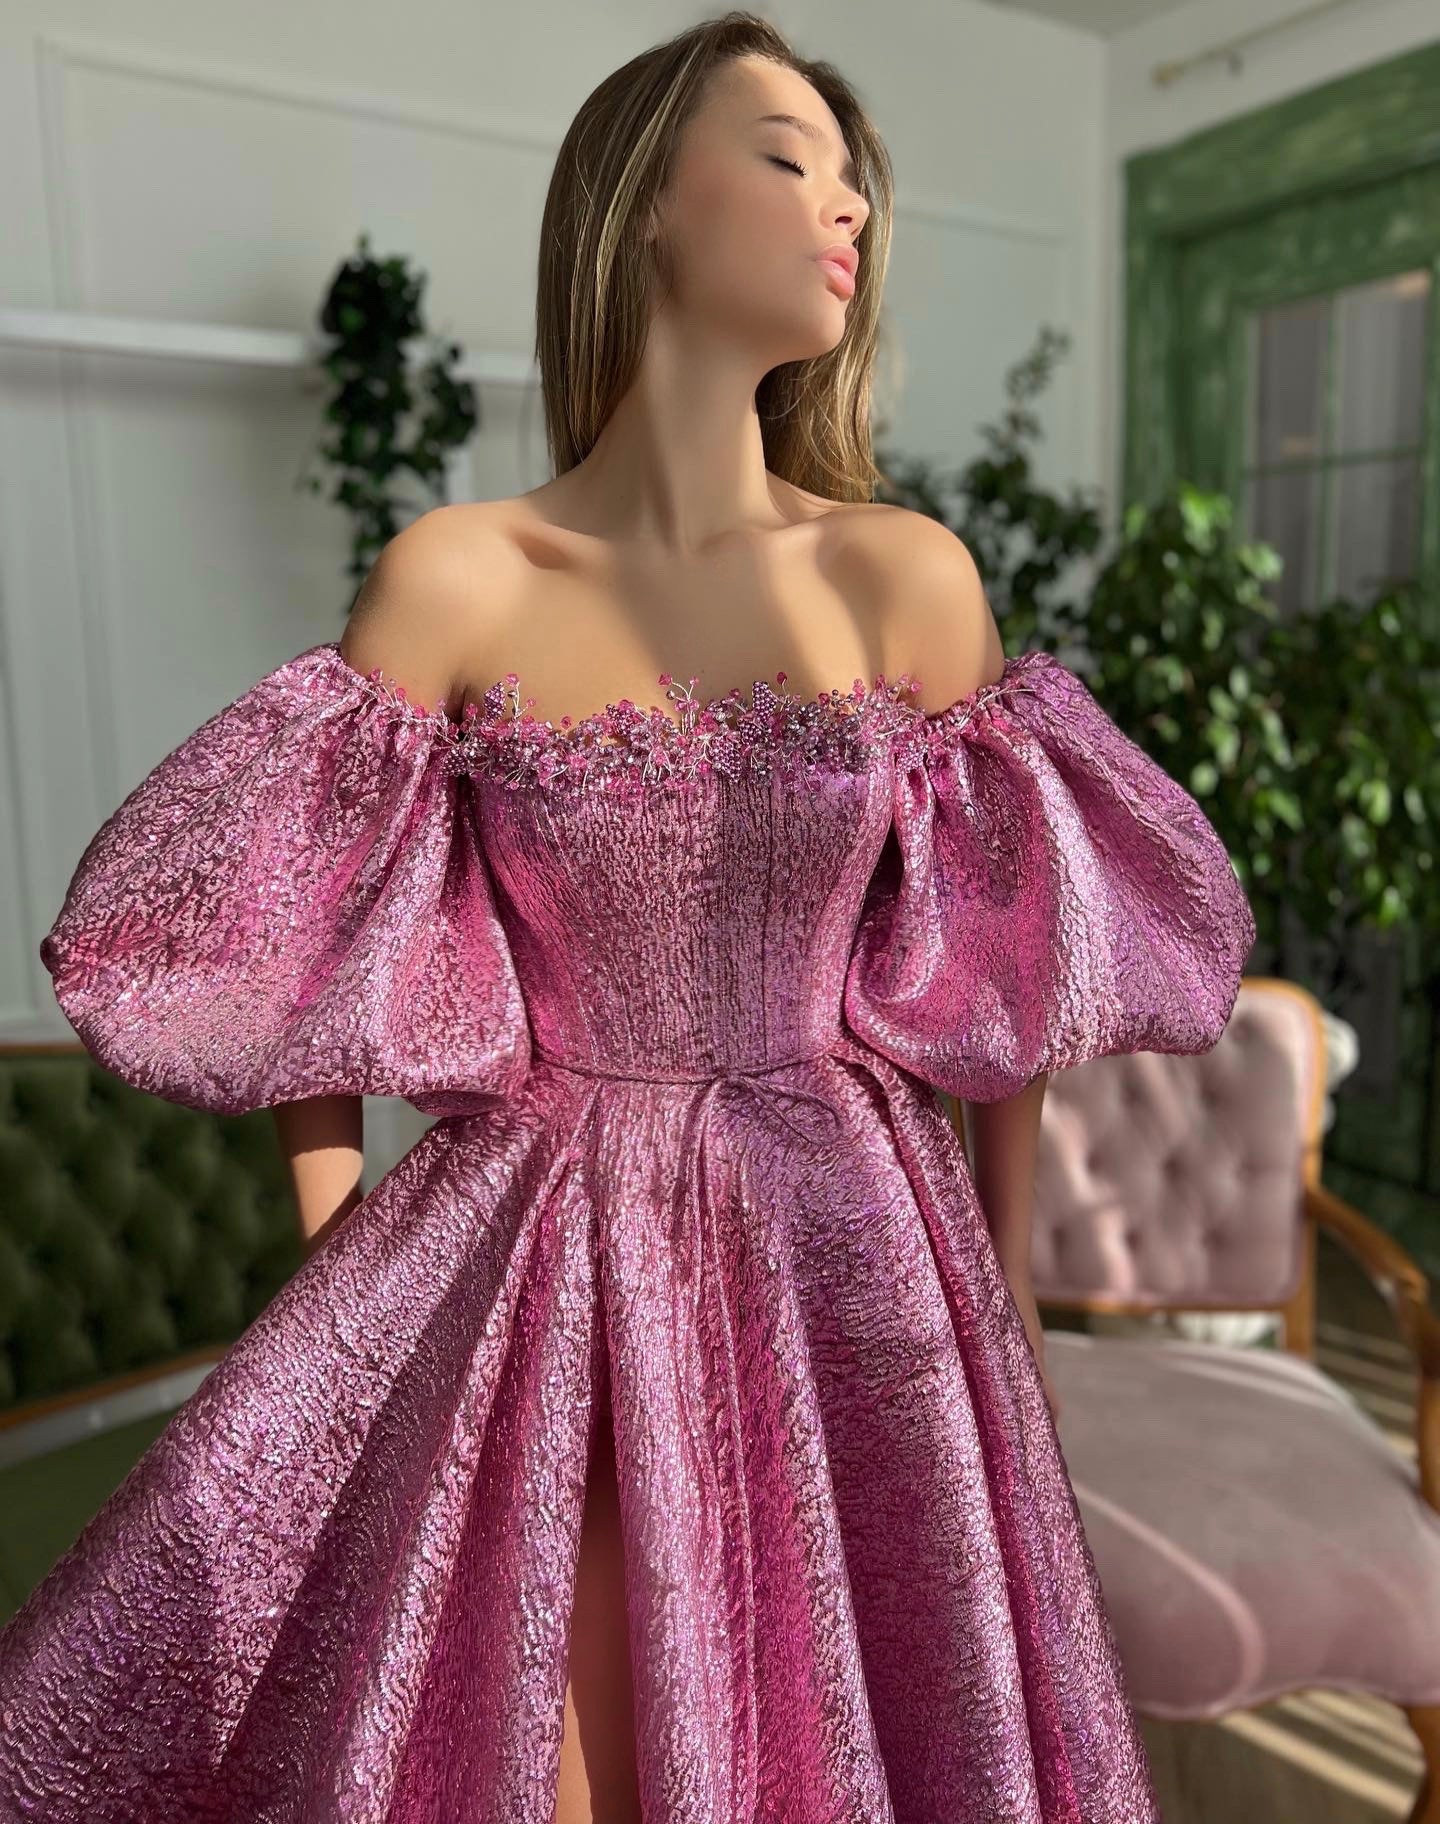 Pink A-Line dress with off the shoulder sleeves, embroidery and taffeta brocade fabric